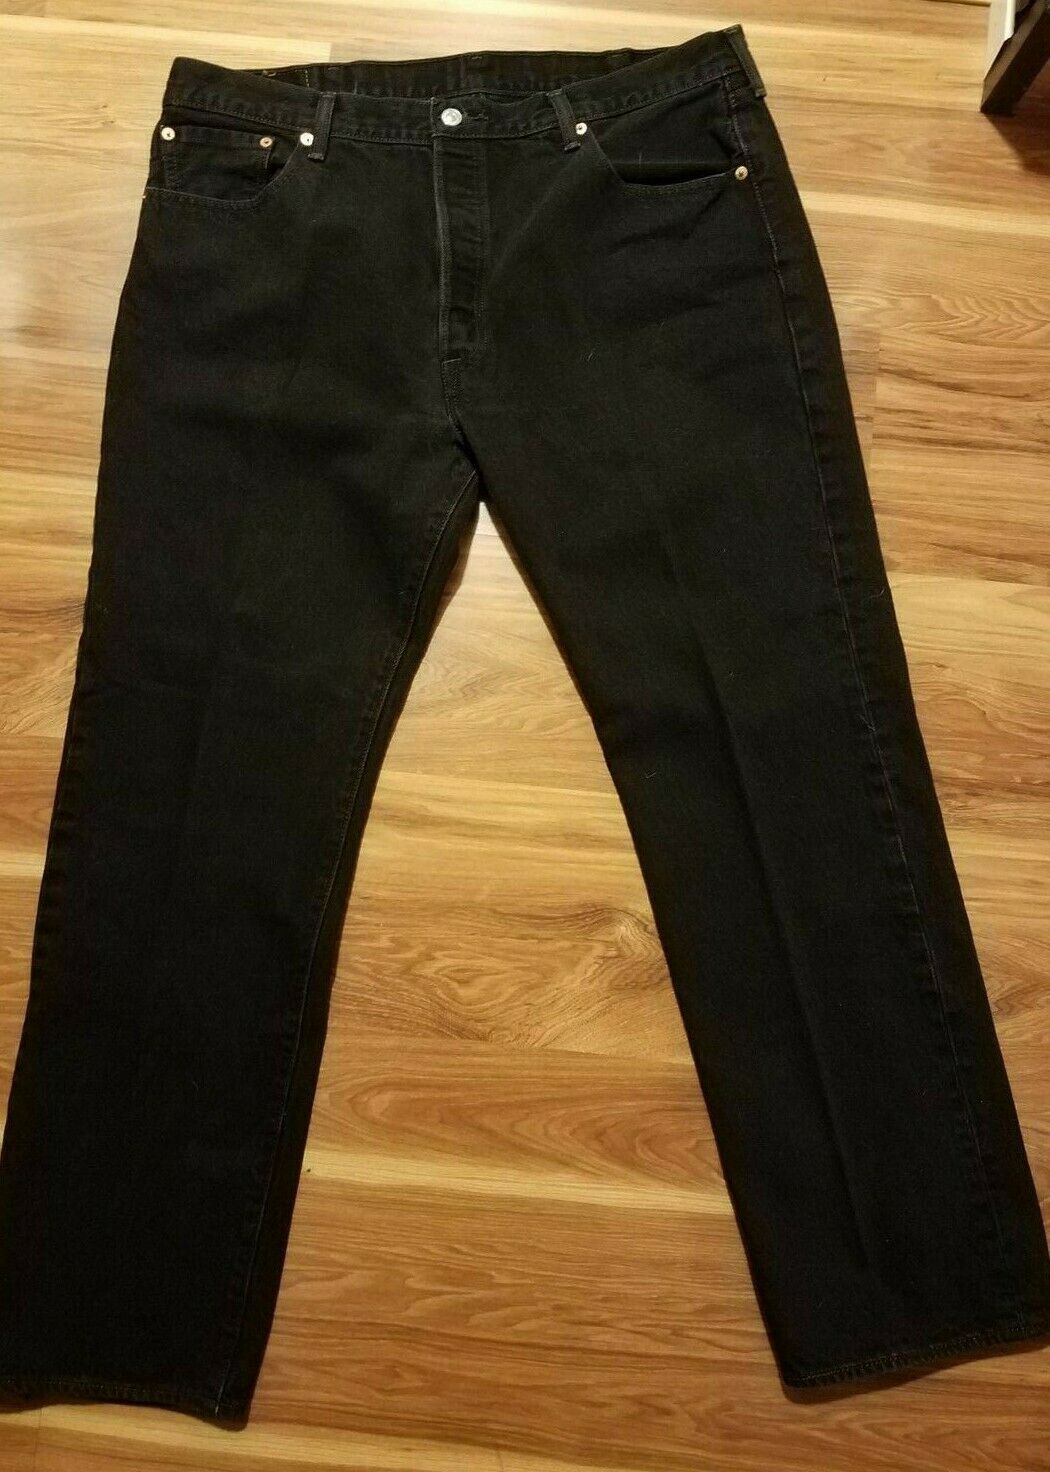 mens levis 501 button fly jeans